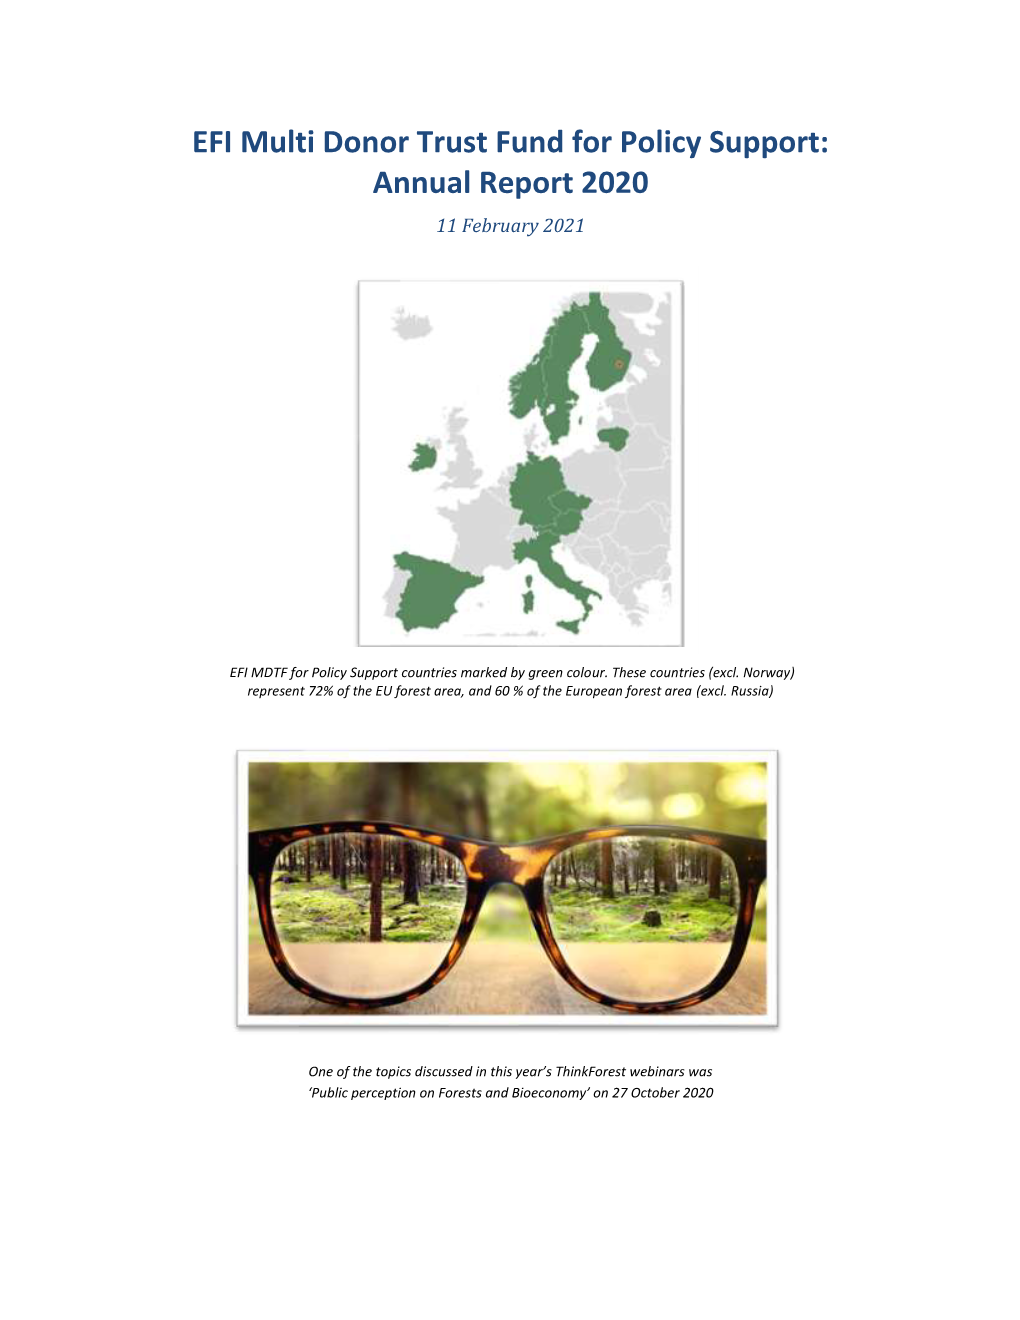 EFI Multi Donor Trust Fund for Policy Support: Annual Report 2020